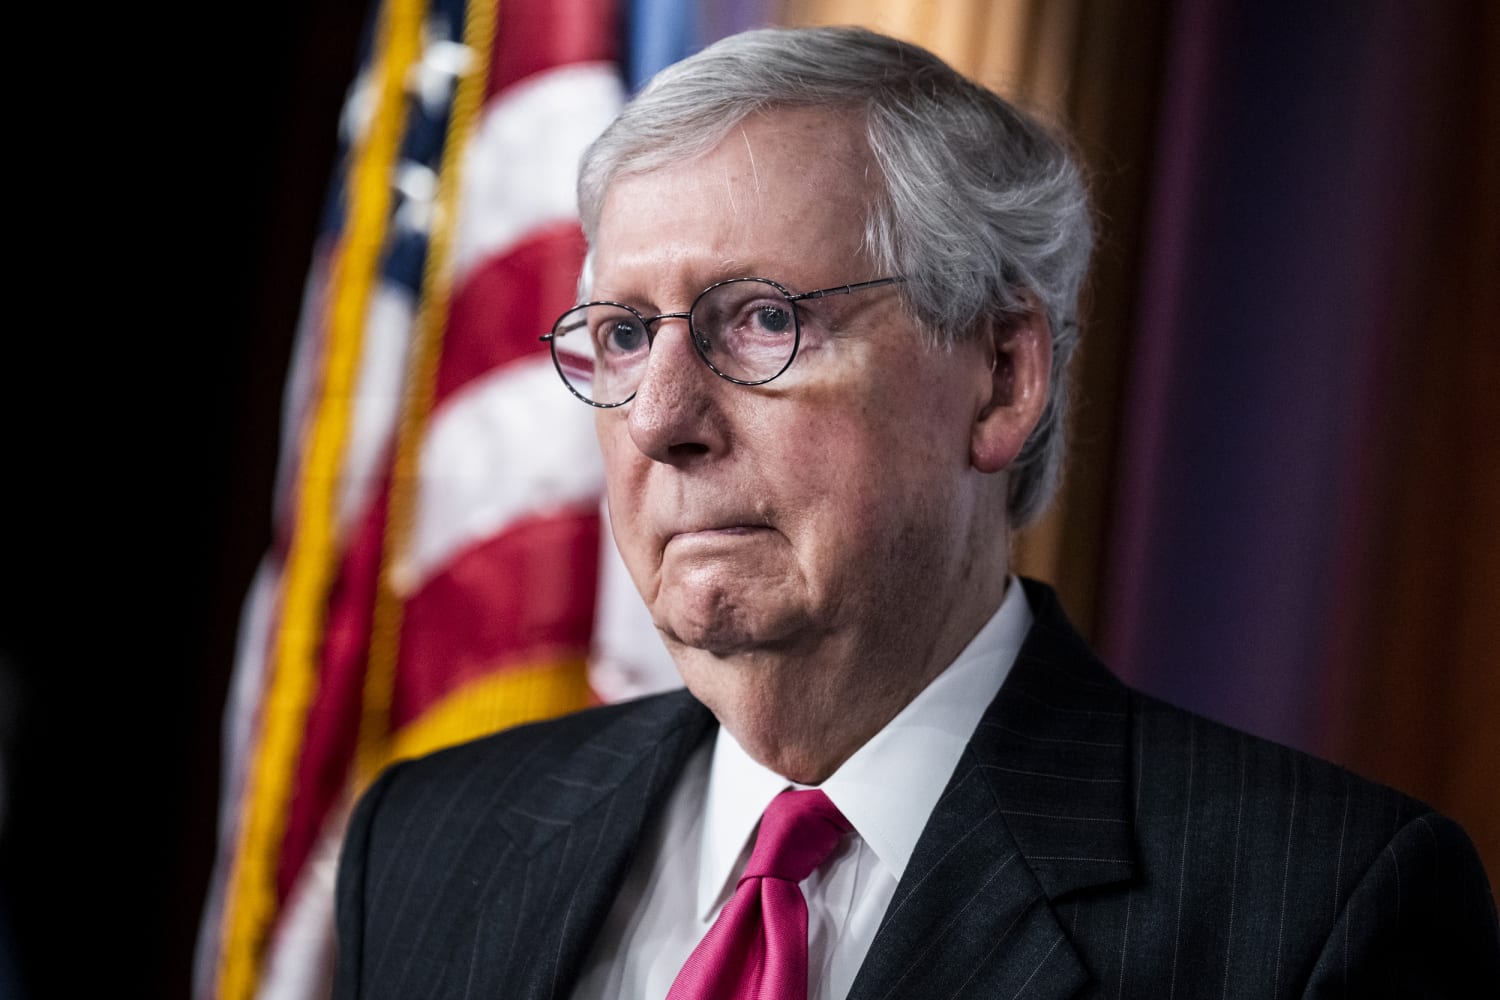 Senate Republican leader Mitch McConnell is being treated for a